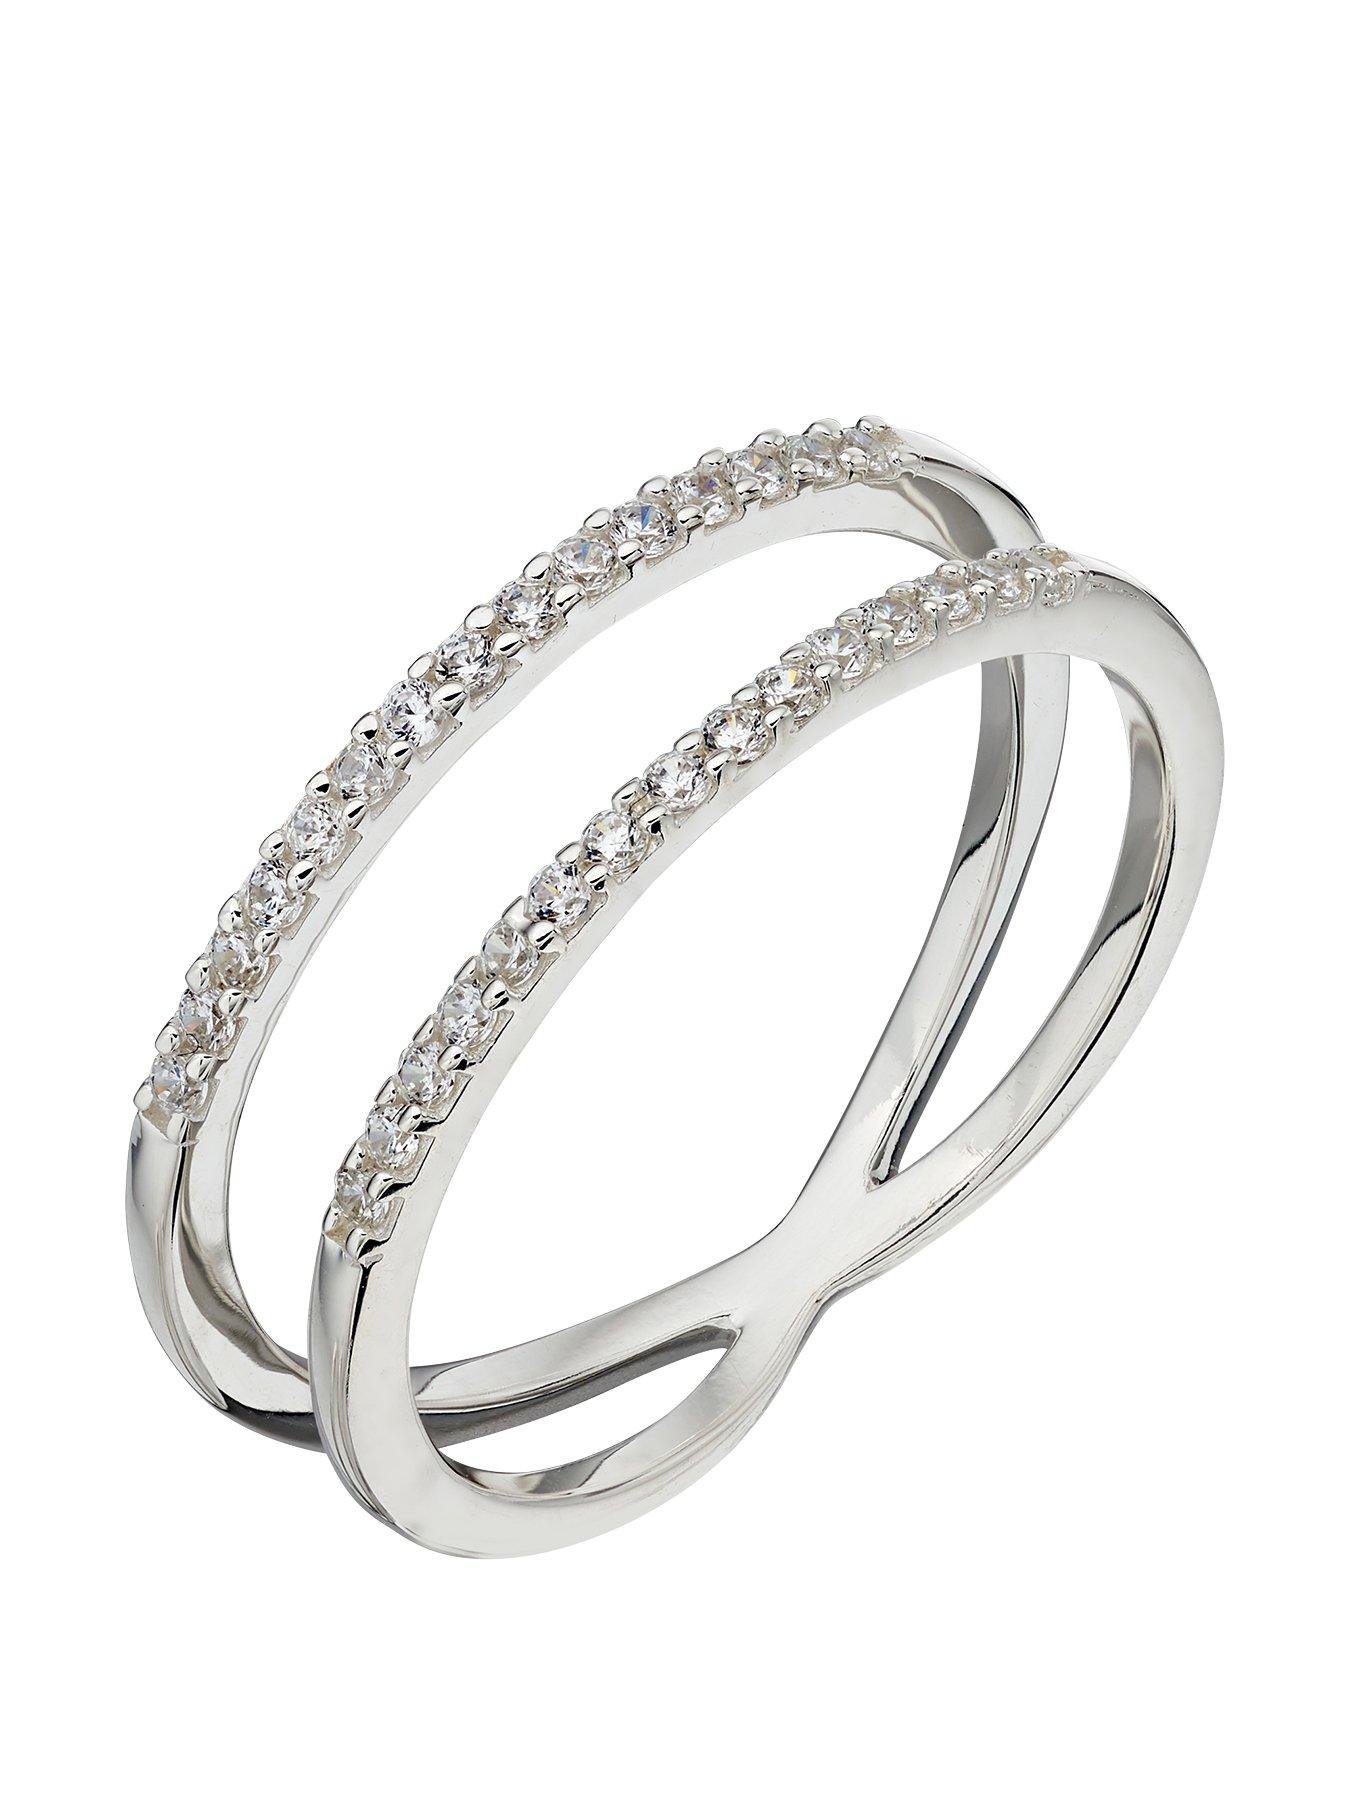 Jewellery & watches Silver Plate White Cubic Zirconia Double band Ring